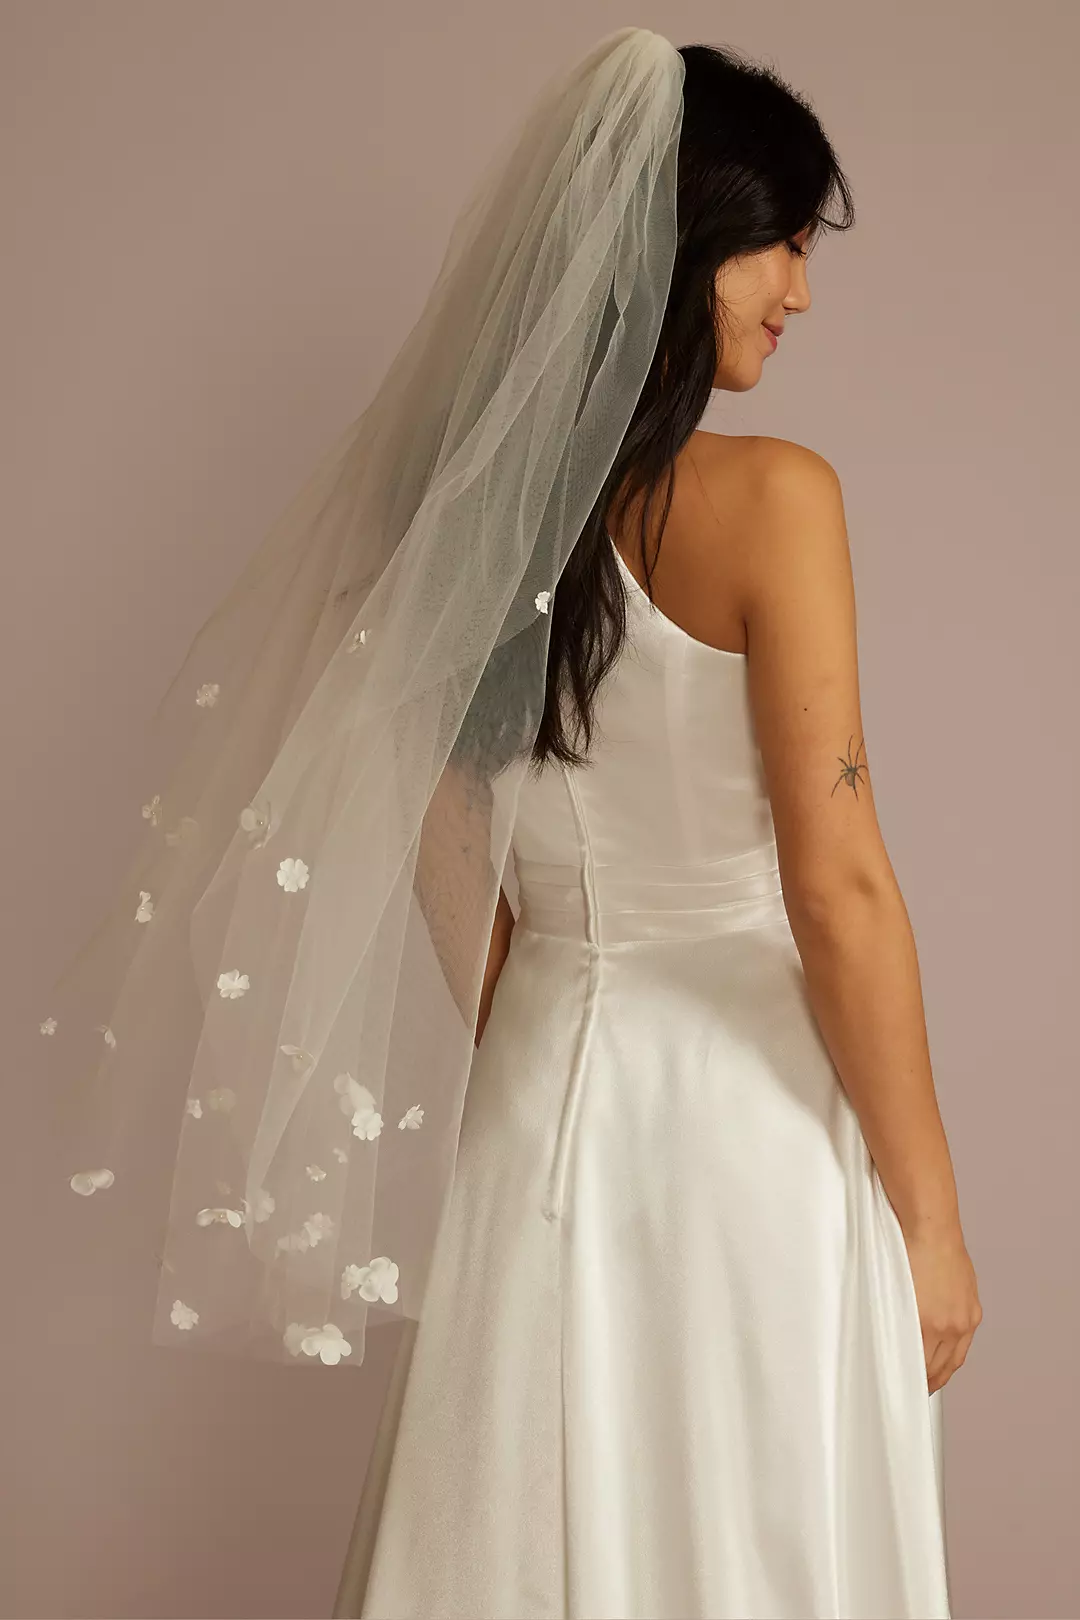 Flower and Pearl Embellished Mid-Length Veil Image 2